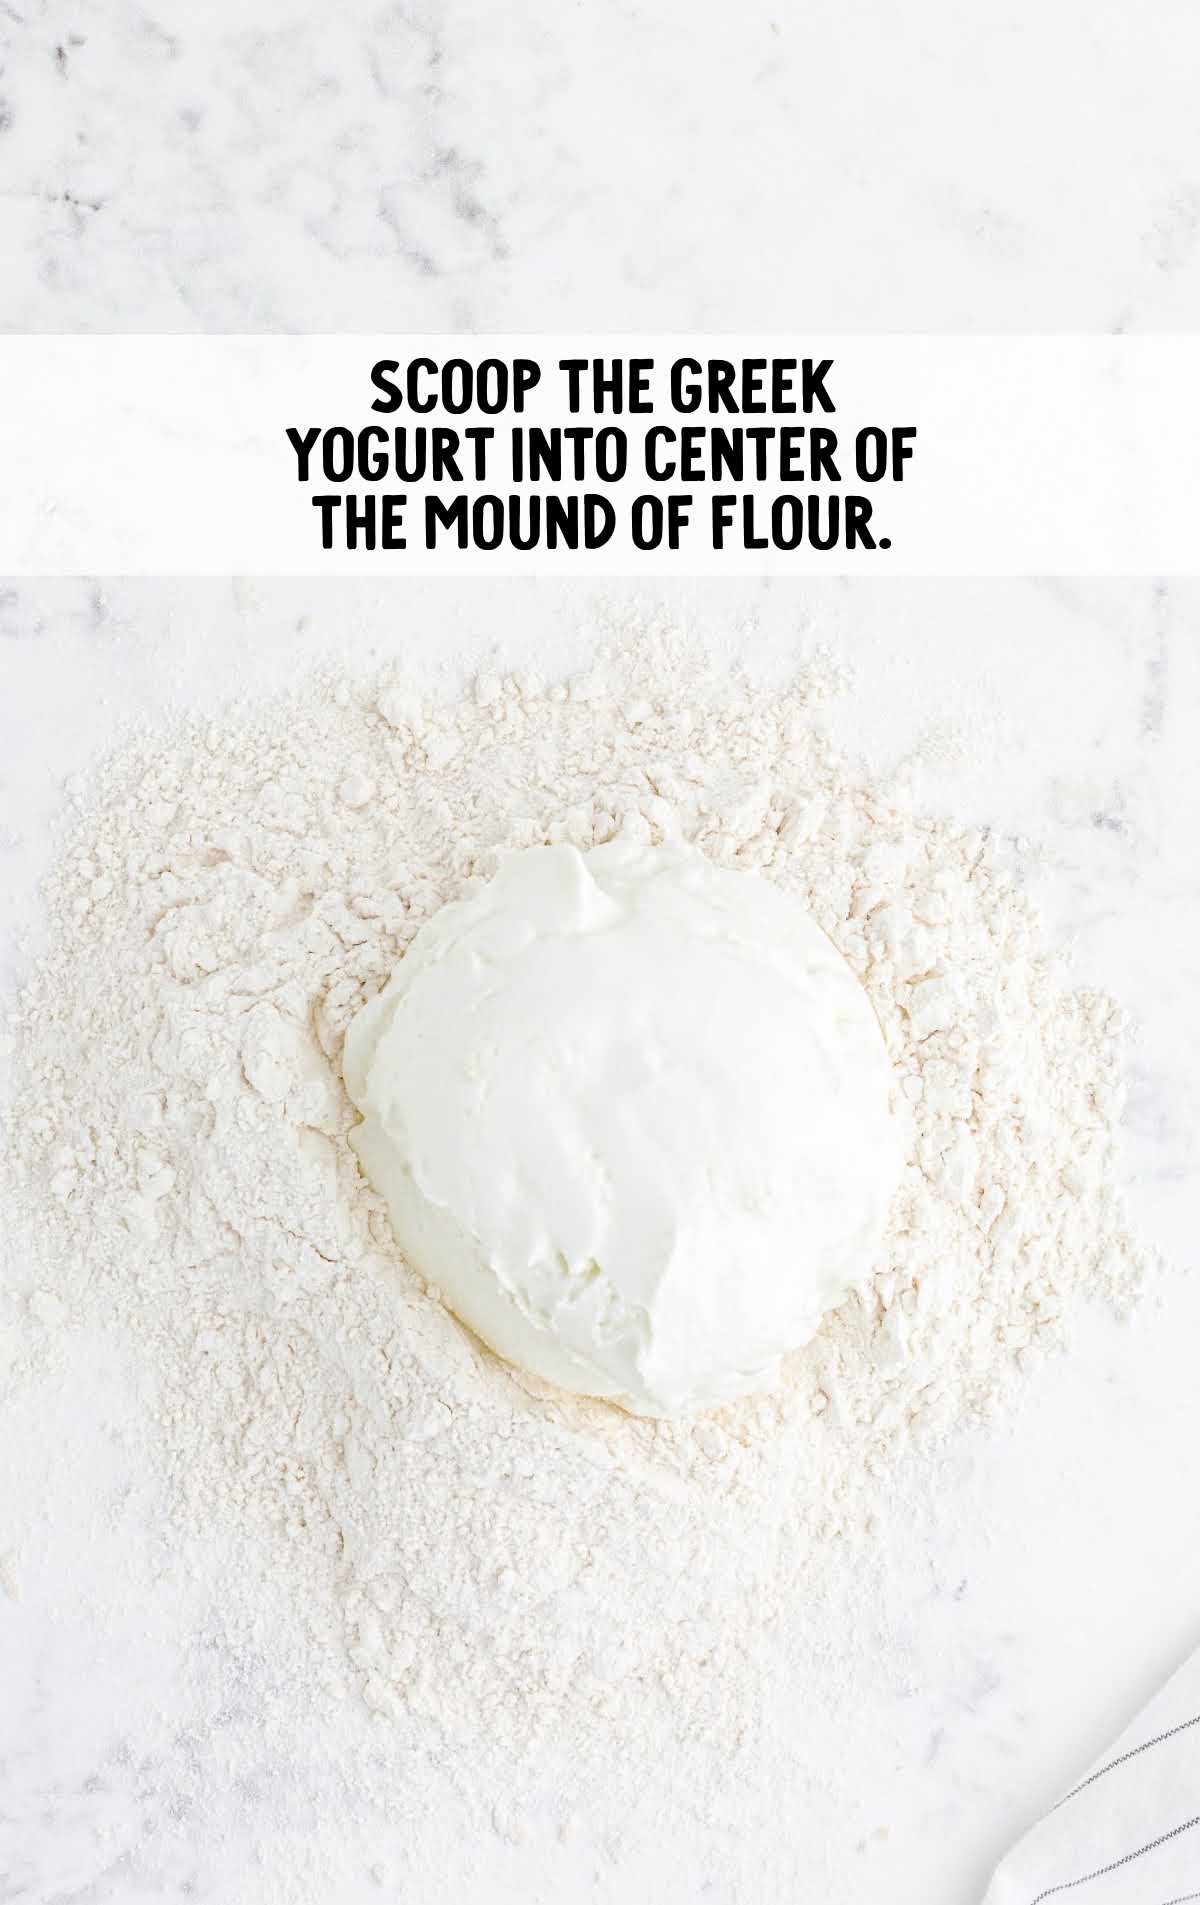 greek yogurt placed into the center of the mound of flour